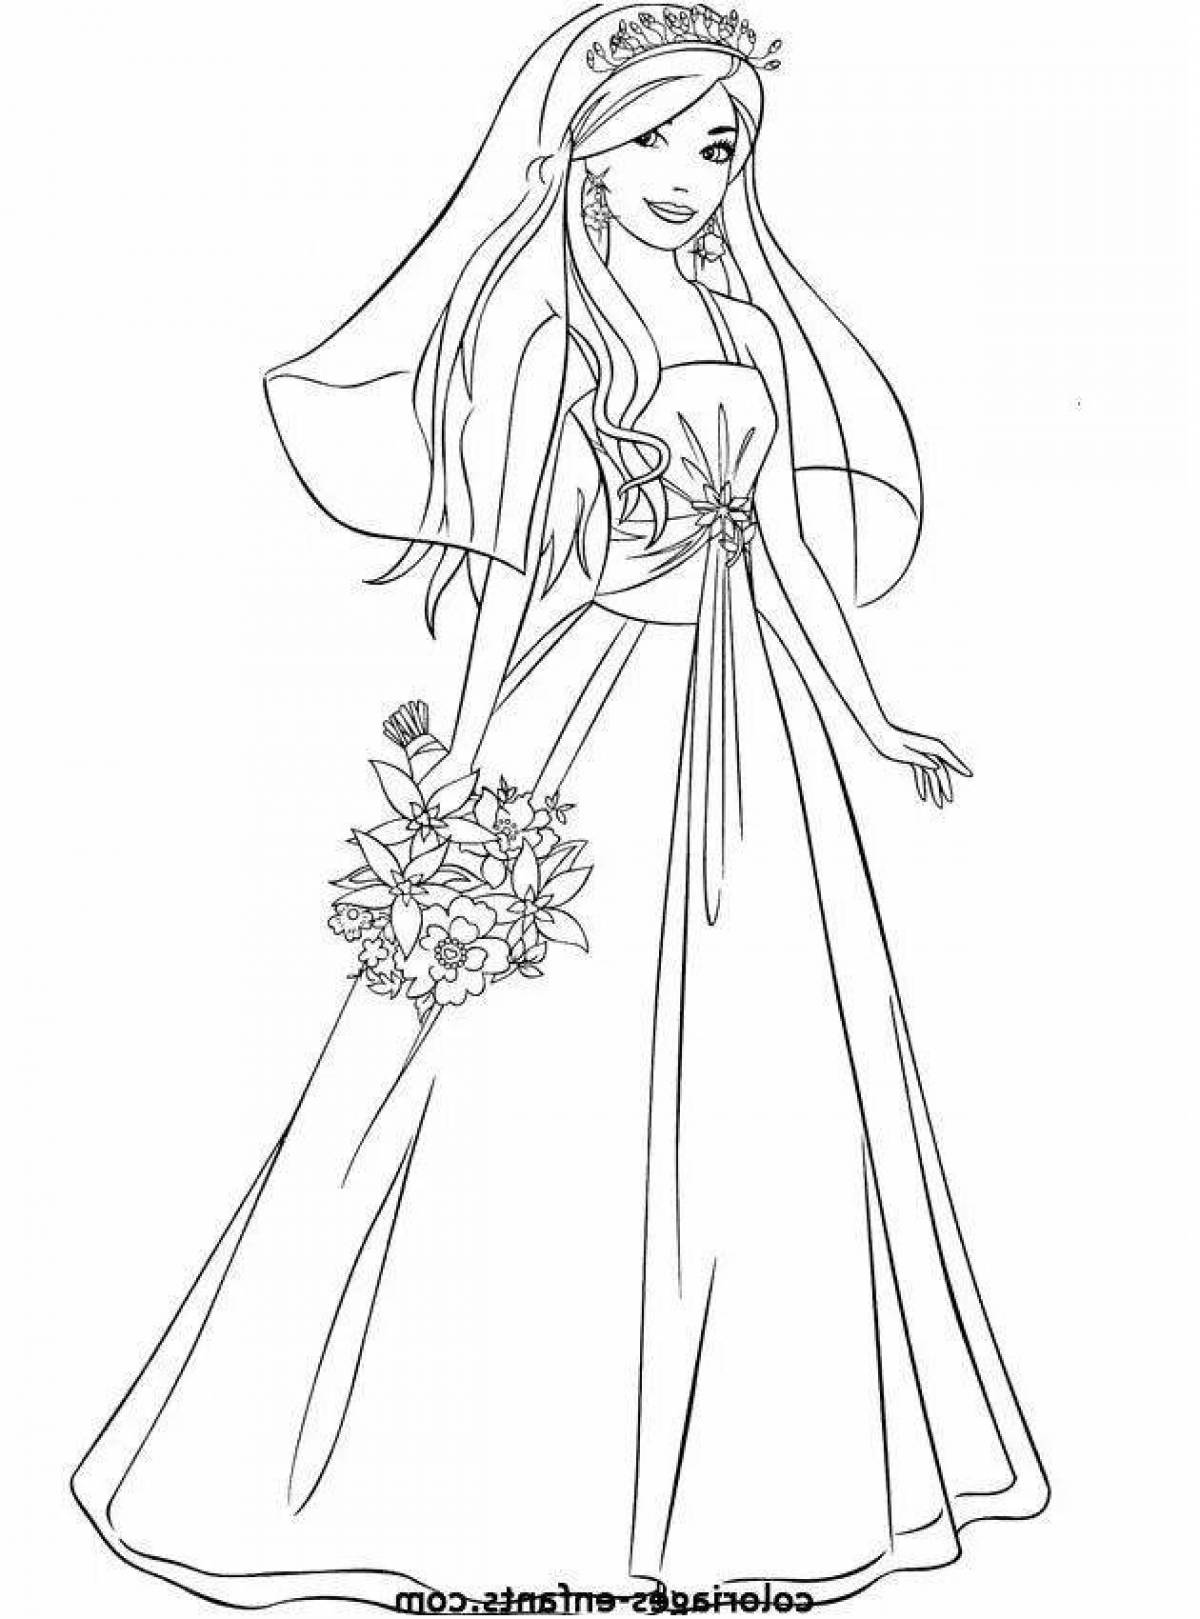 Glamorous bride coloring page